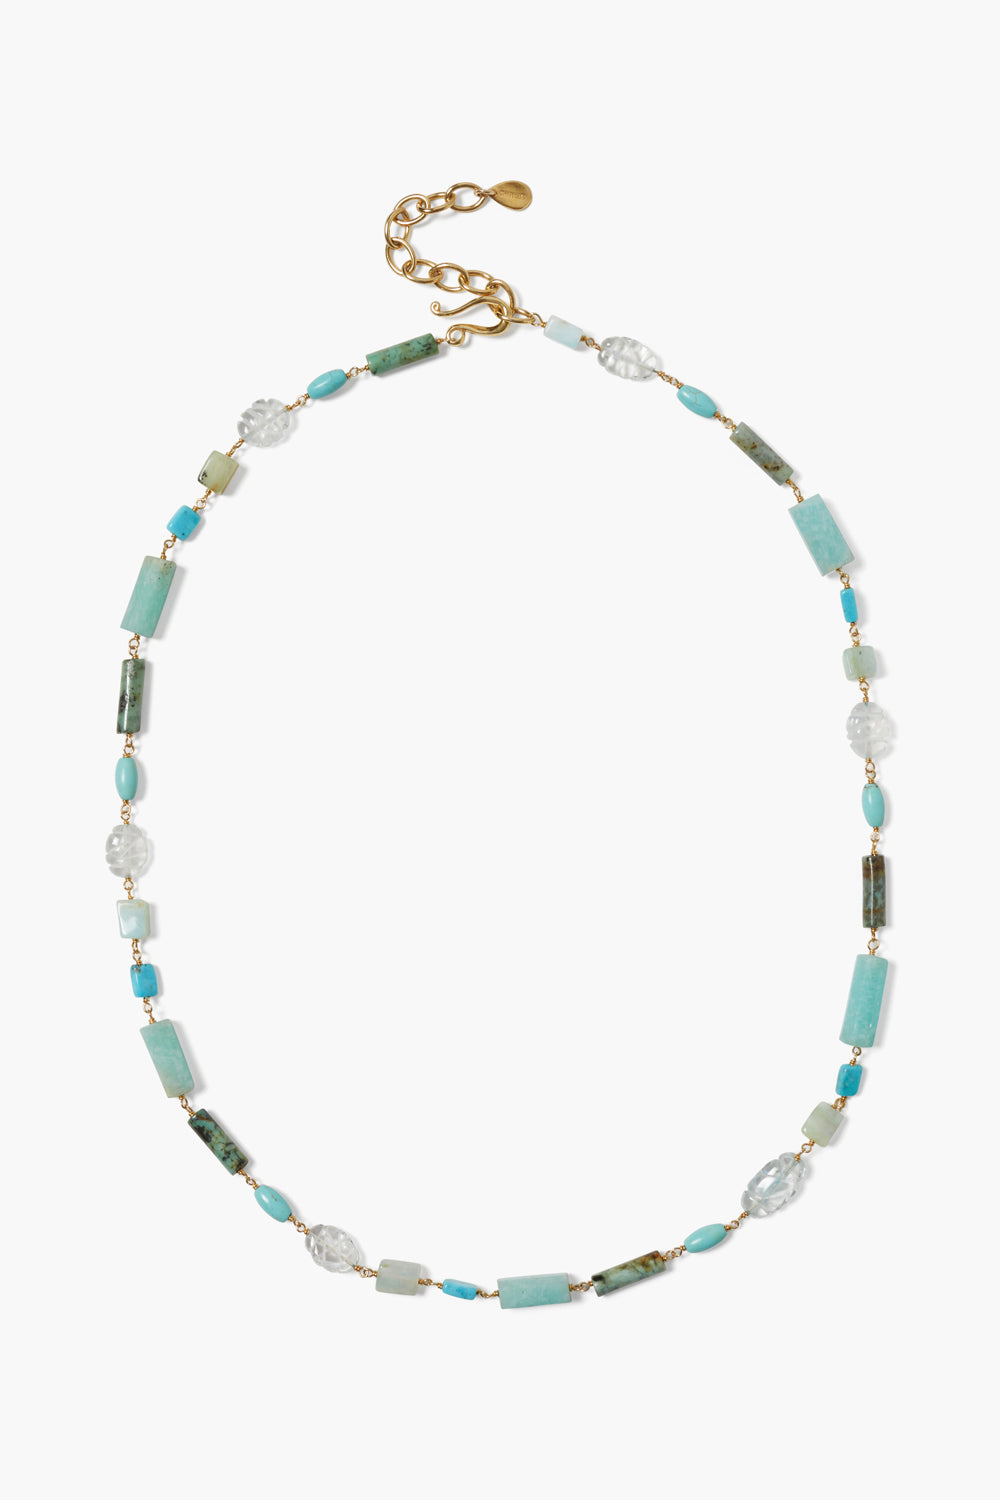 Chan Luu | Eden Necklace | Turquoise Mix